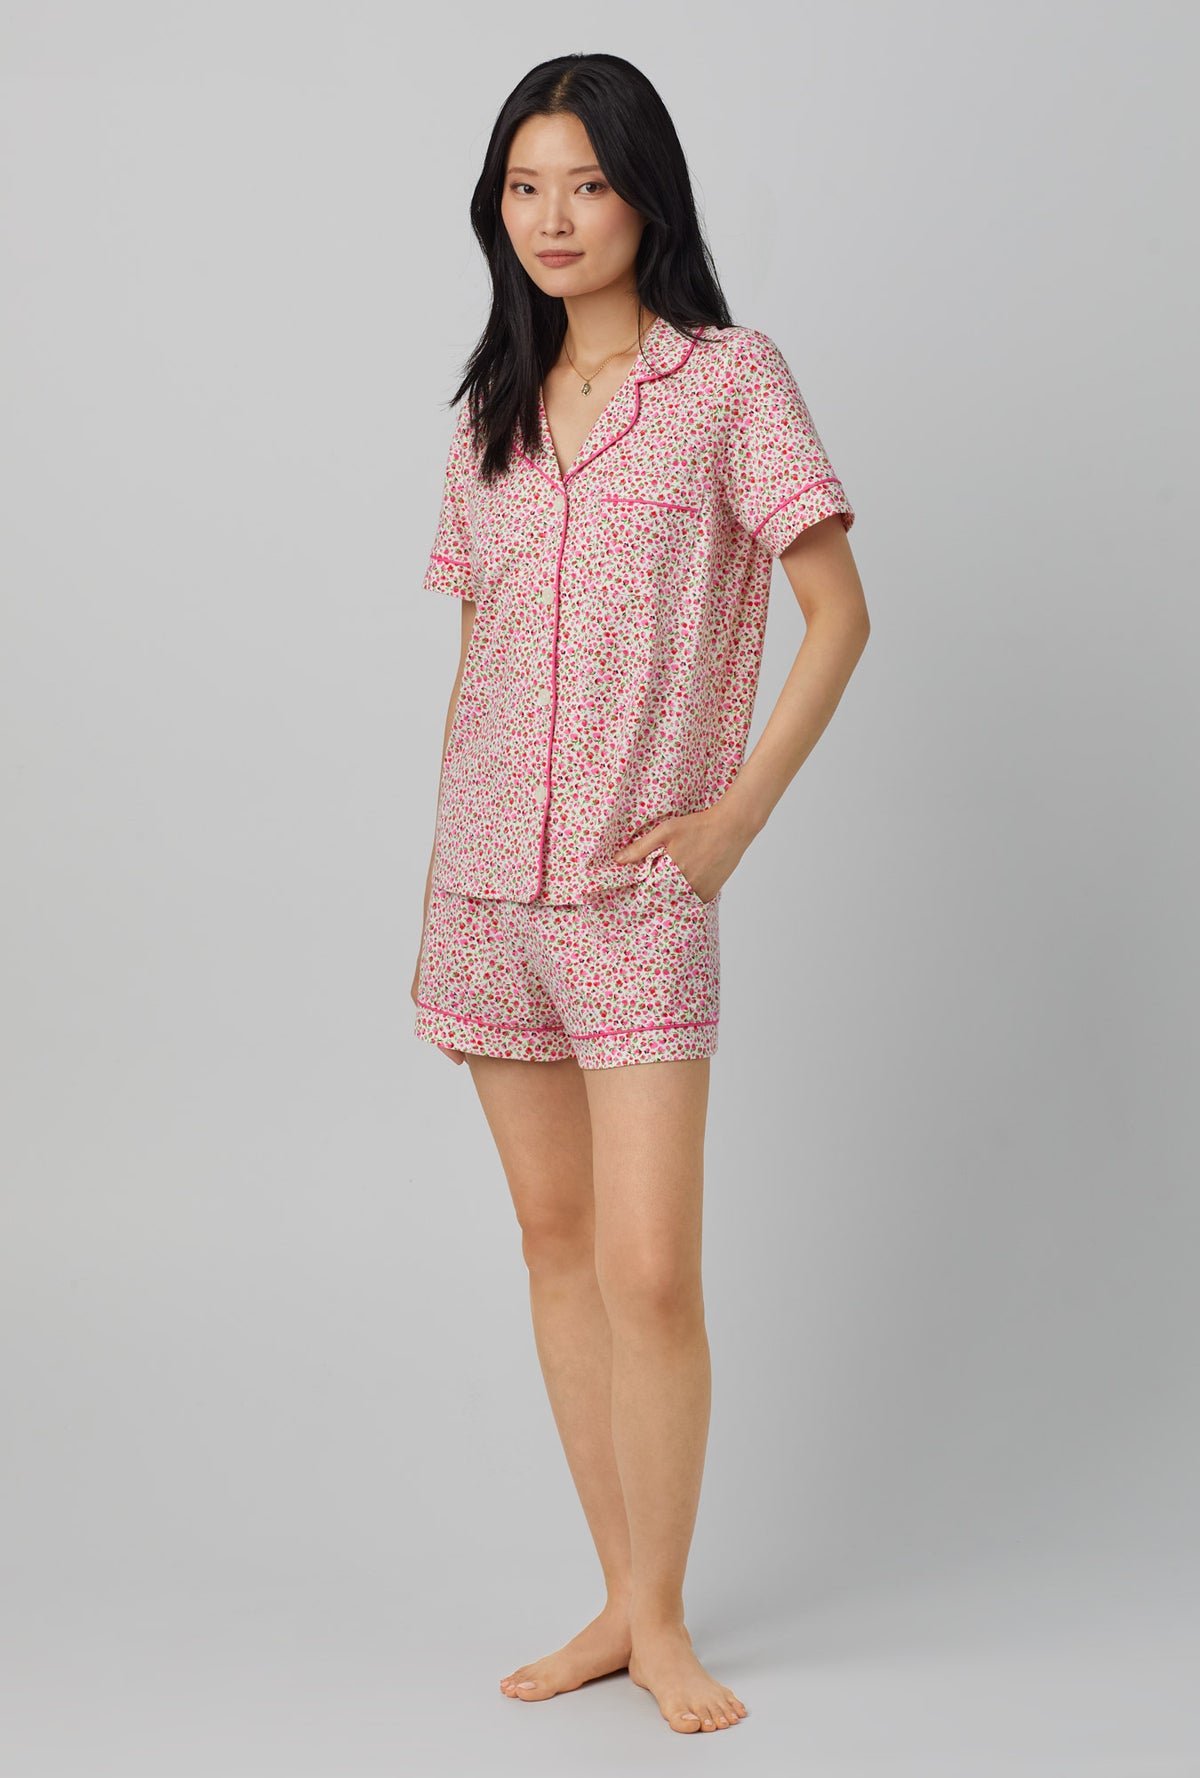 A lady wearing pink Short Sleeve Classic Short Set with Lynn print